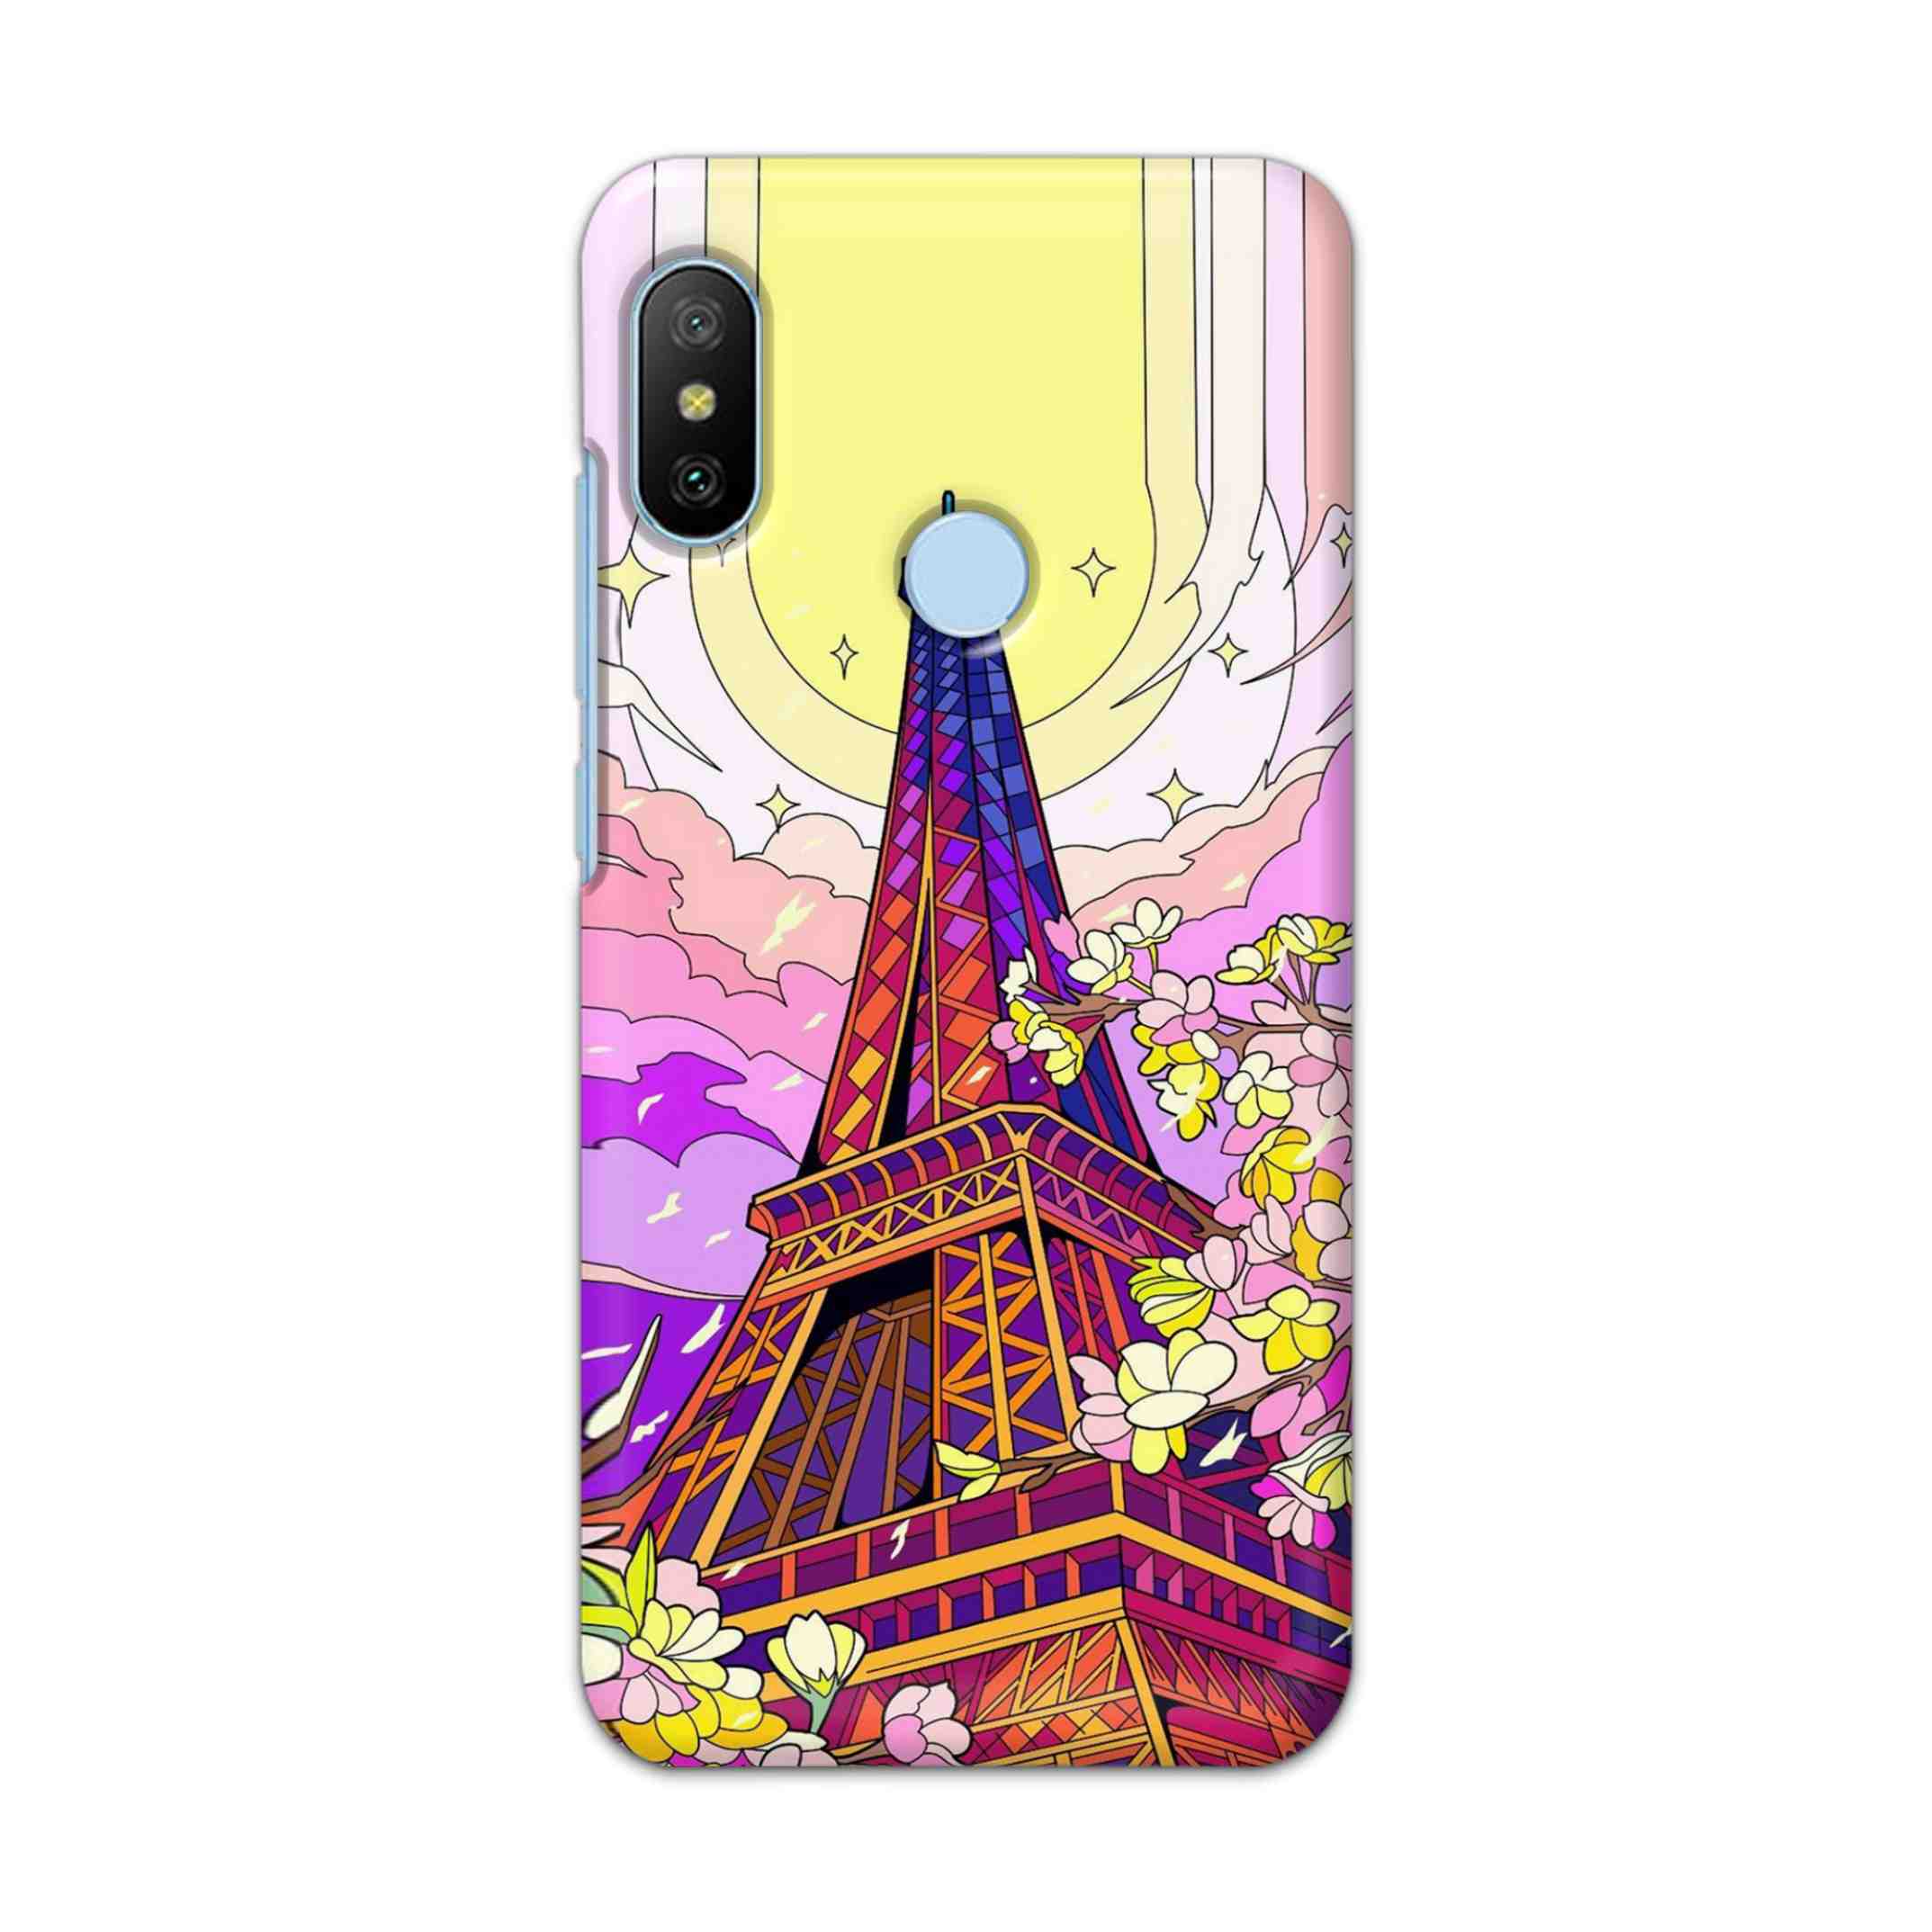 Buy Eiffl Tower Hard Back Mobile Phone Case/Cover For Xiaomi A2 / 6X Online